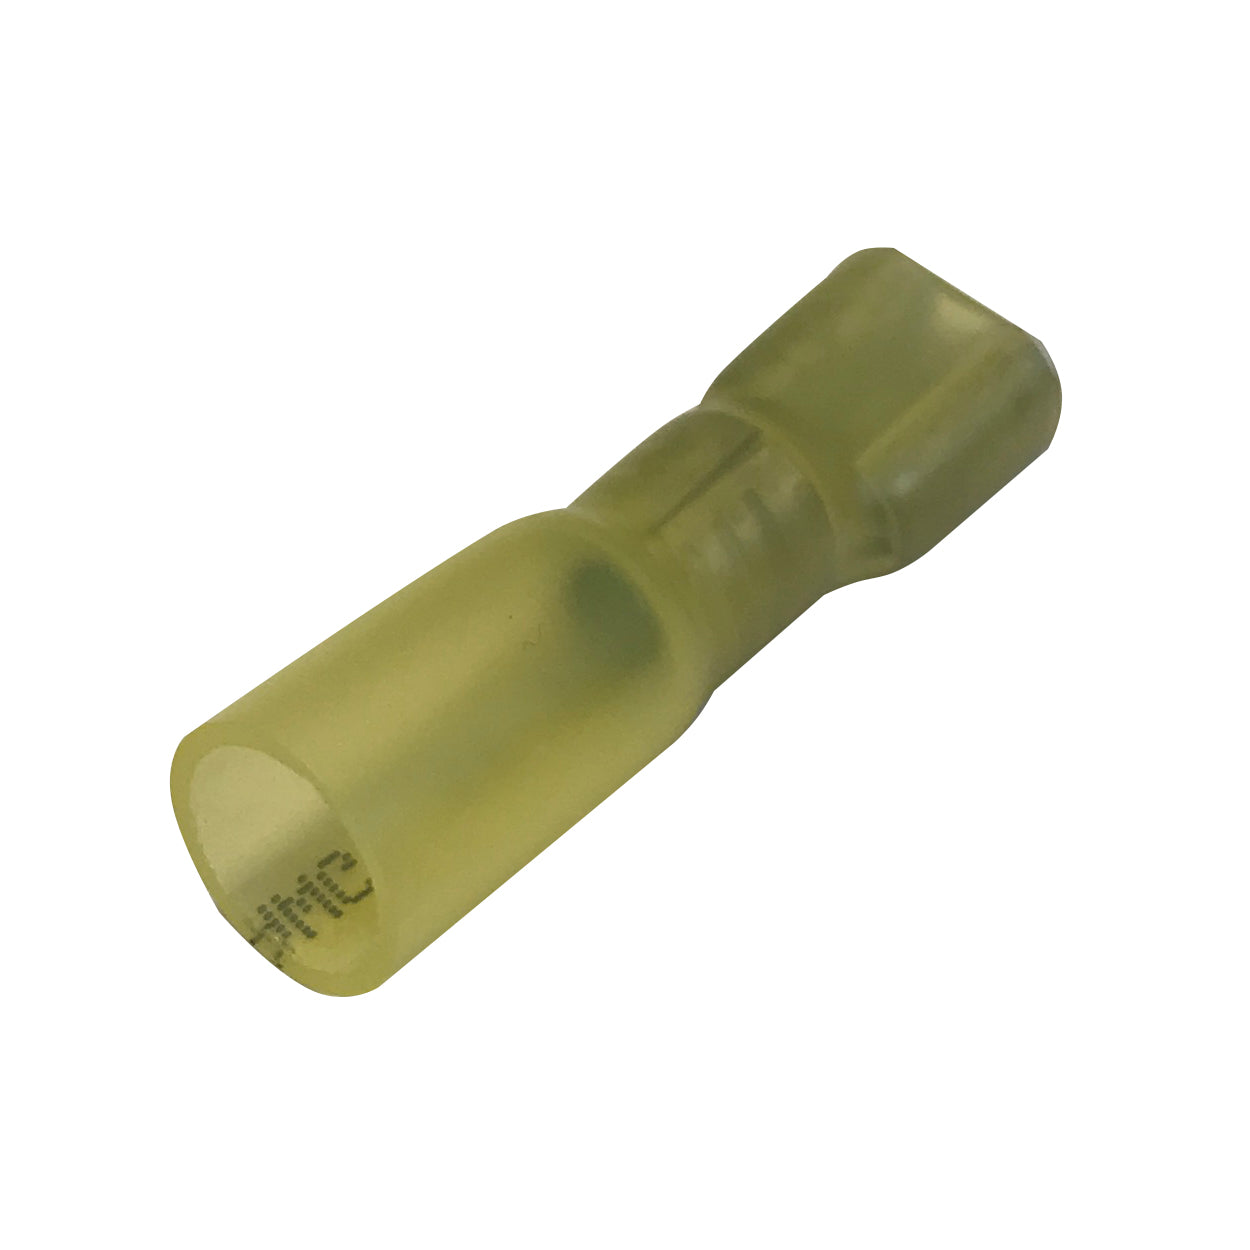 Heat Shrink & Crimp Yellow Fully Insulated Female Quick Disconnect 8 Gauge .250 Tab - 10 Pack